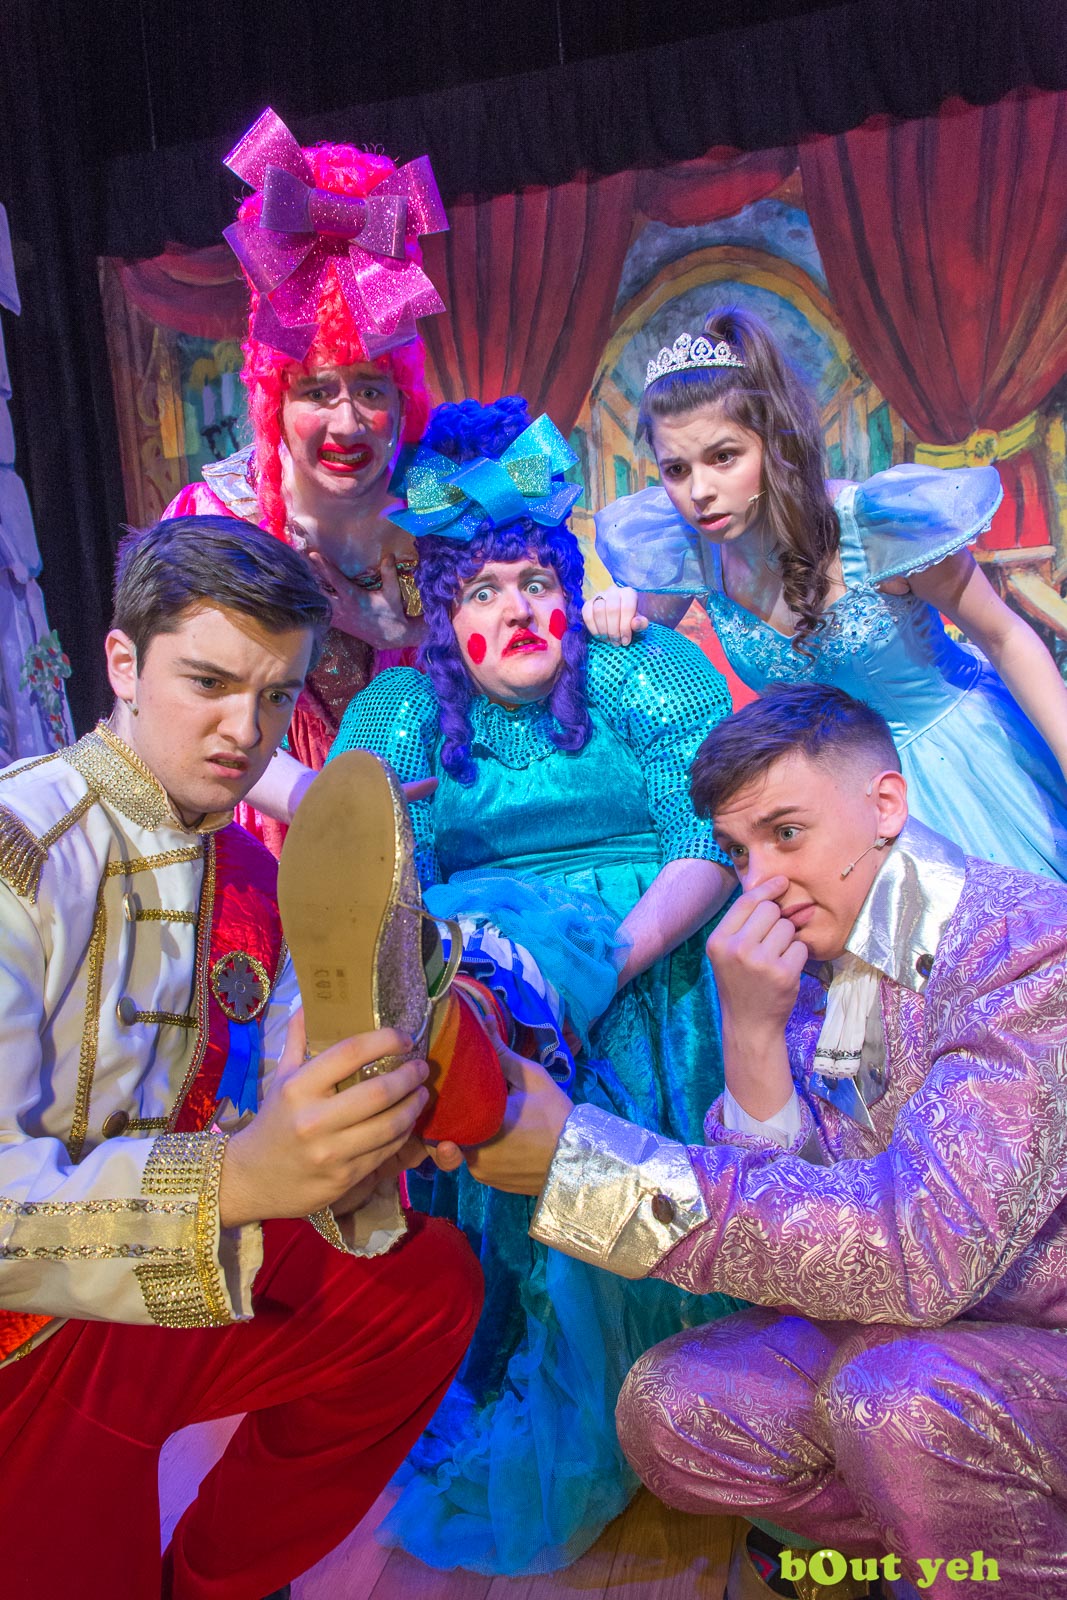 PR photographers Belfast portfolio photo 9971 of Cinderella pantomime at the Old Courthouse Theatre Antrim - Bout Yeh photography and video production services Belfast, Northern Ireland